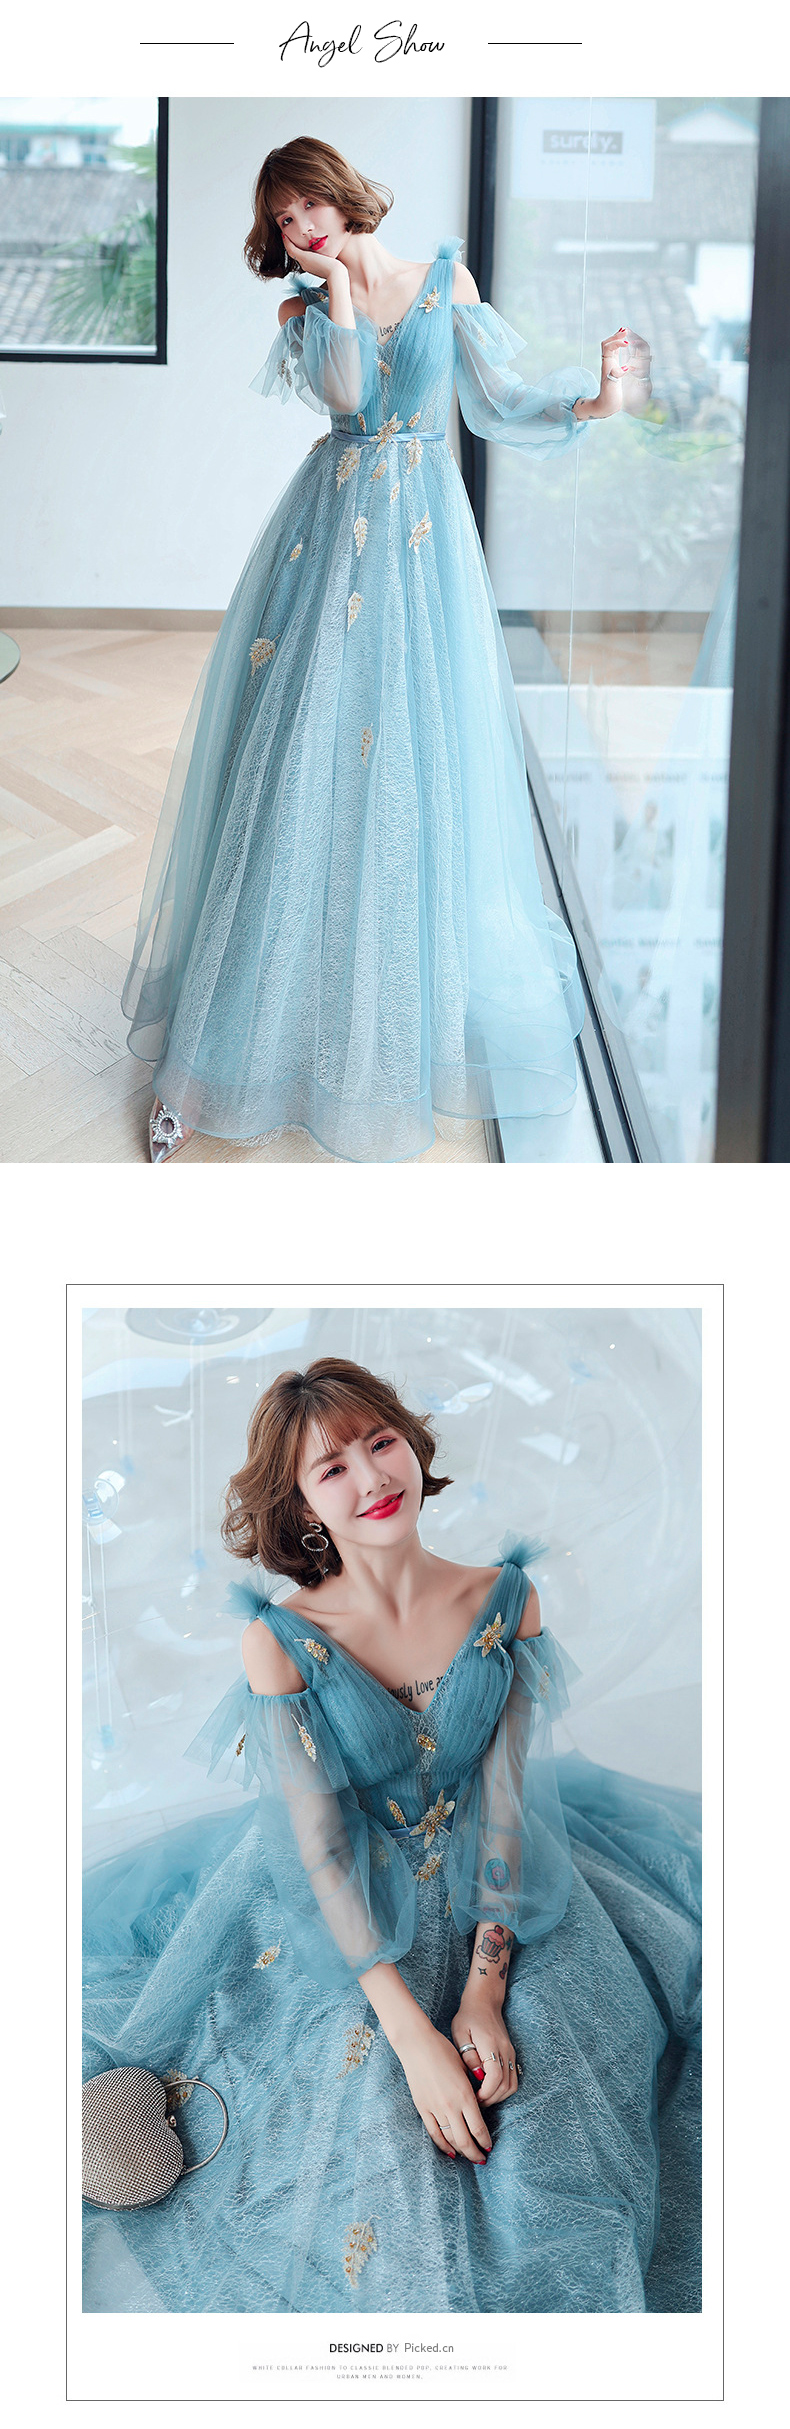 Fairy Long Sleeves Dress for Homecoming, Party and Wedding09